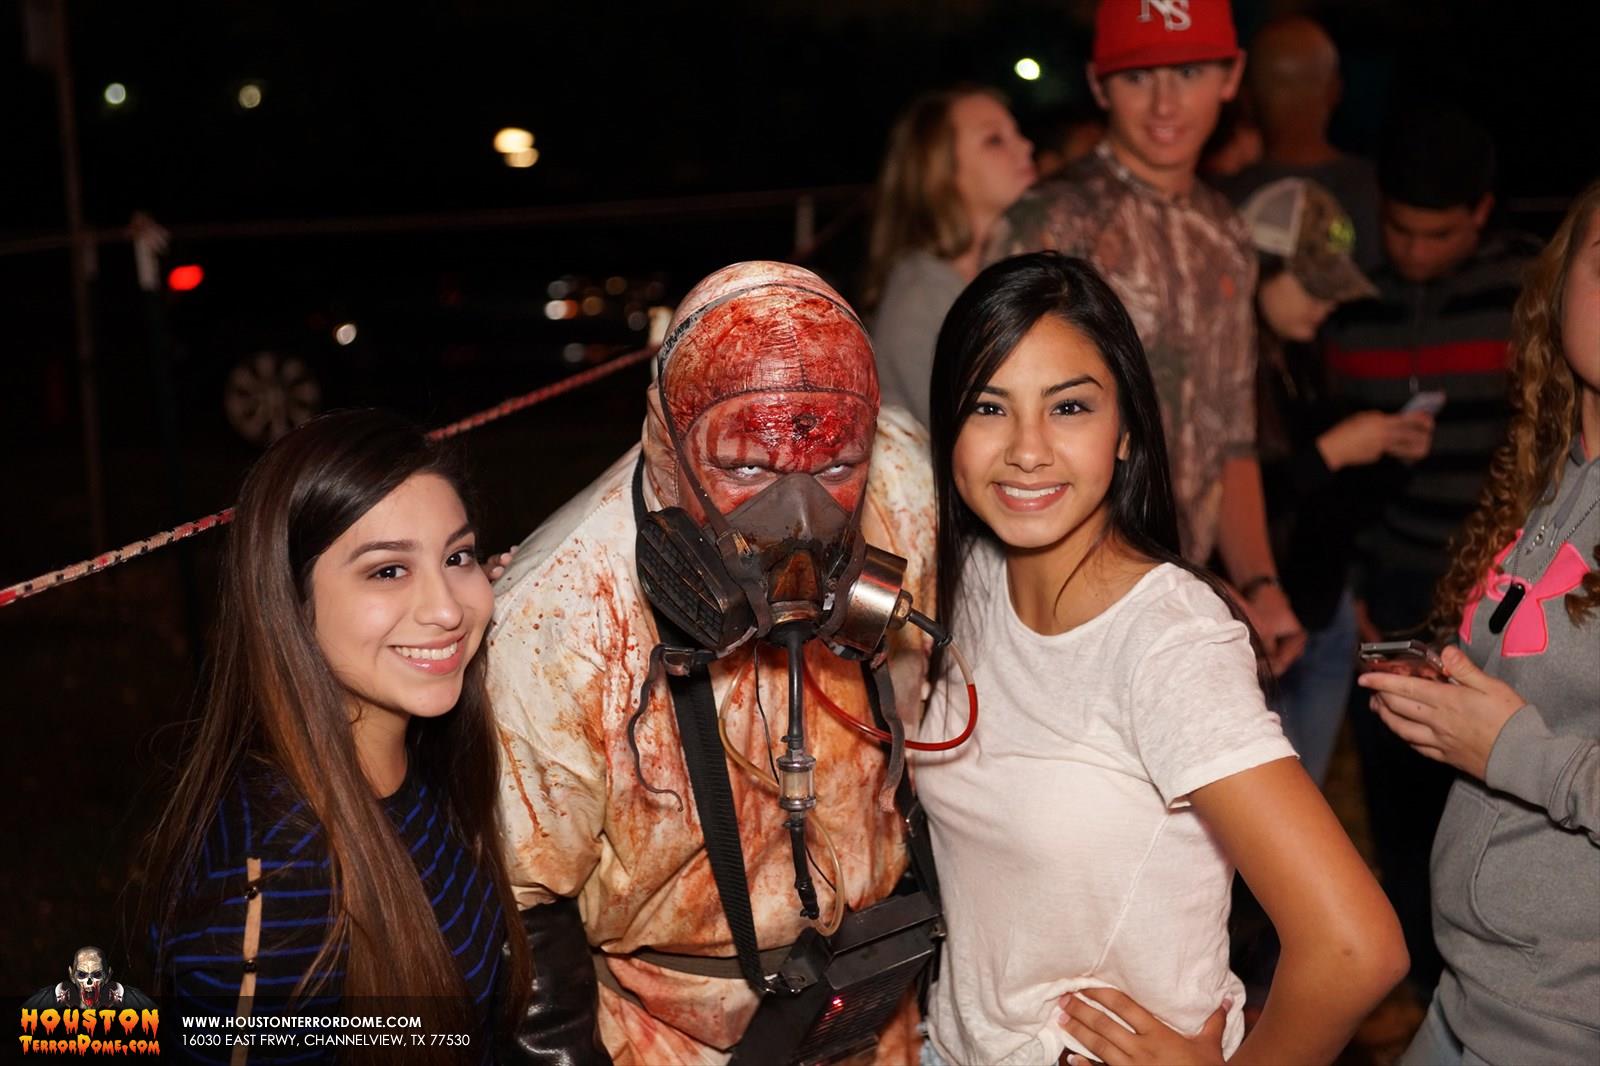 2014 October 2nd Weekend at Terror Dome Haunted House